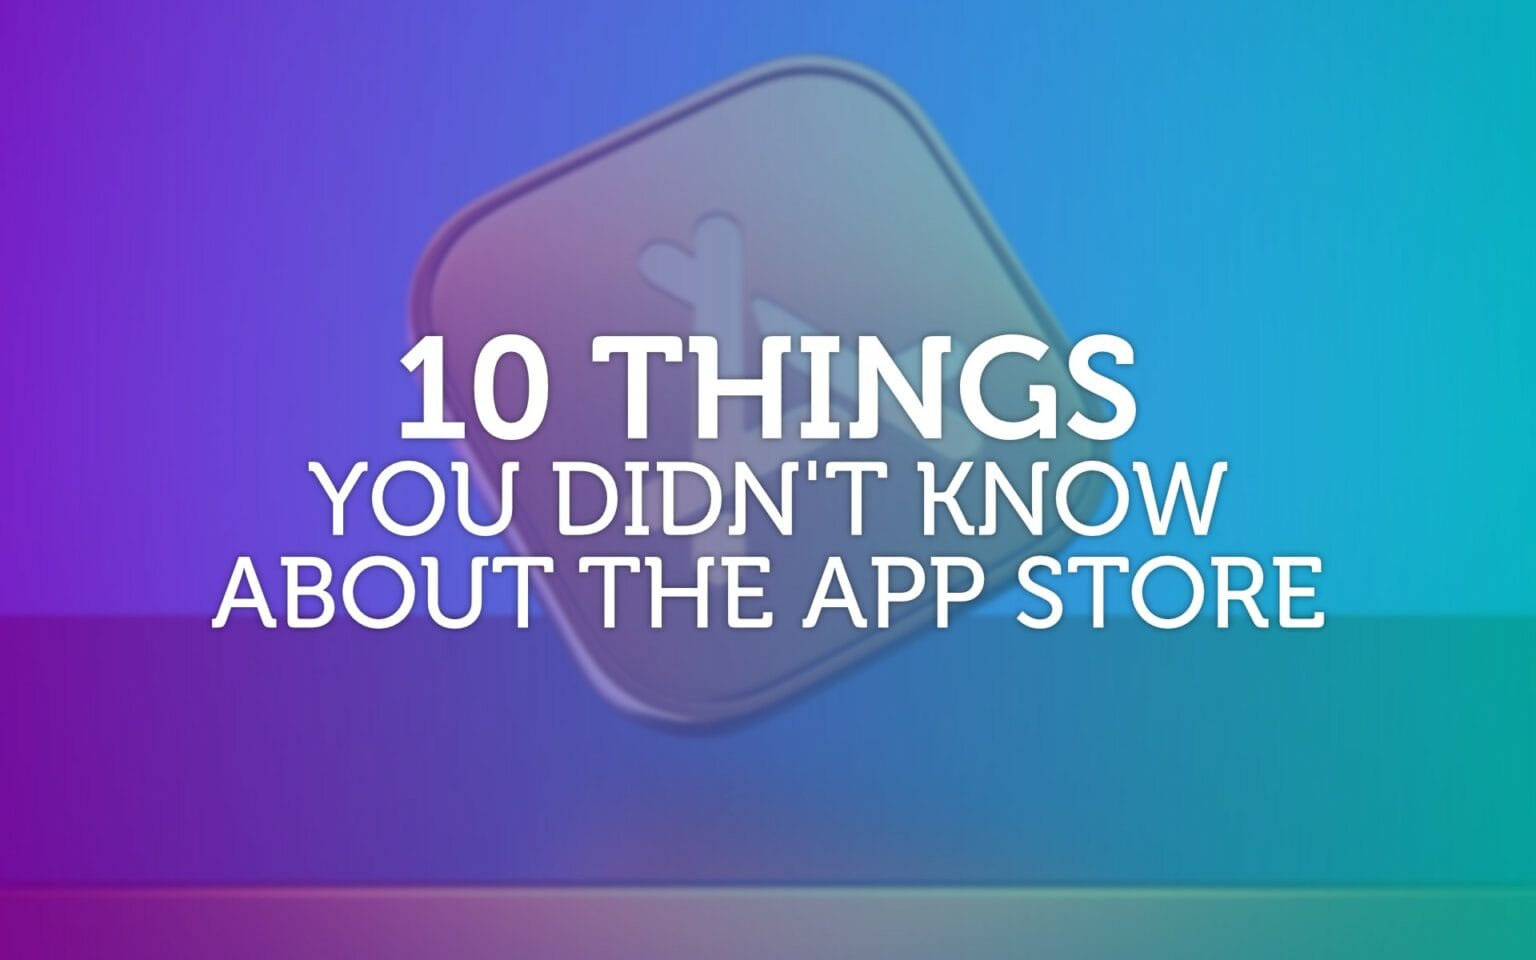 10 things you didn't know about the App Store